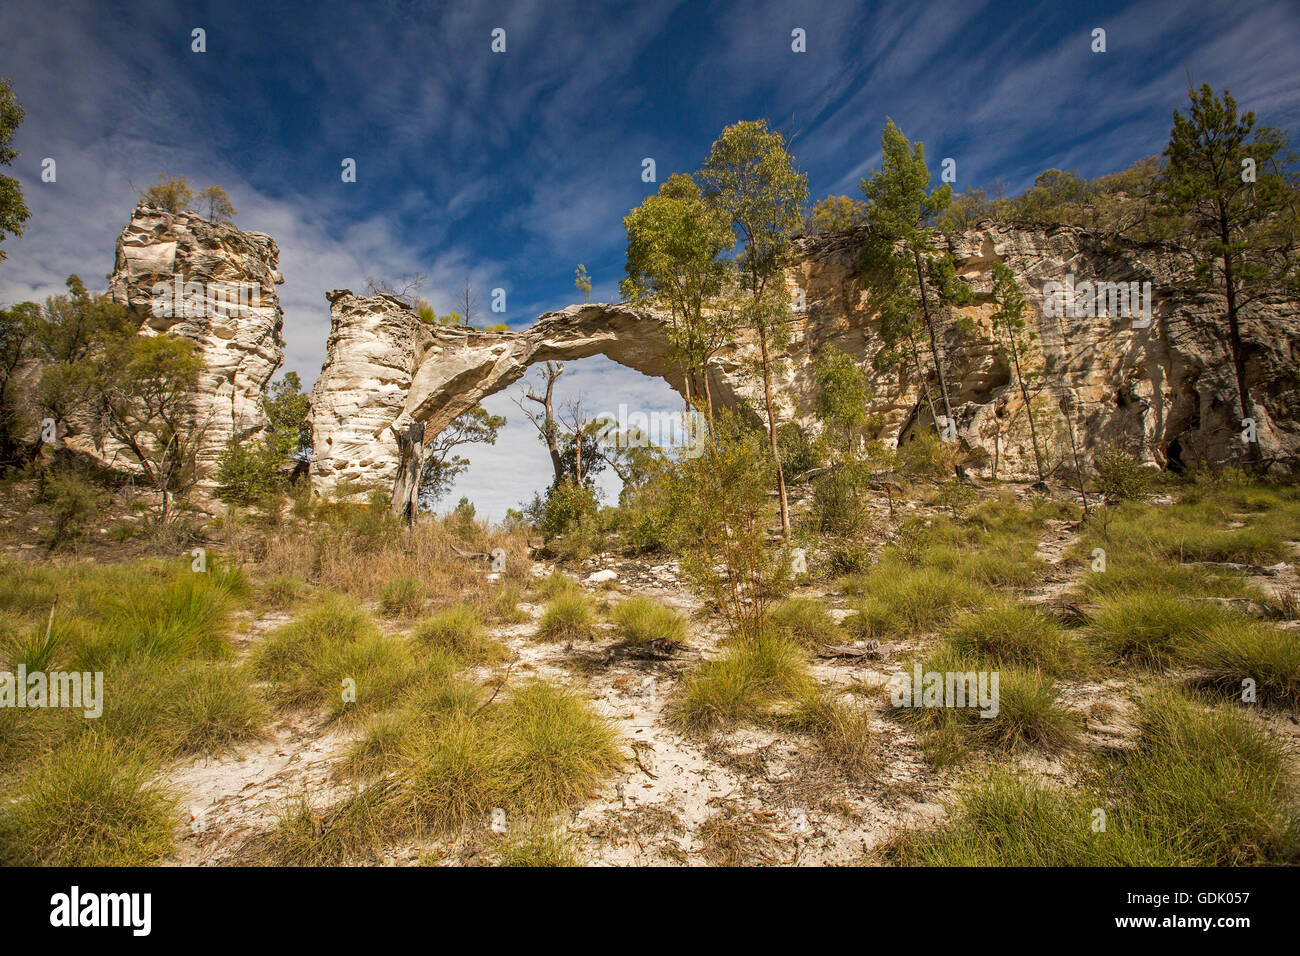 Natural sandstone arch at Mount Moffatt / Carnarvon National Park in Australian outback landscape of tufts of grass & trees under blue sky Stock Photo